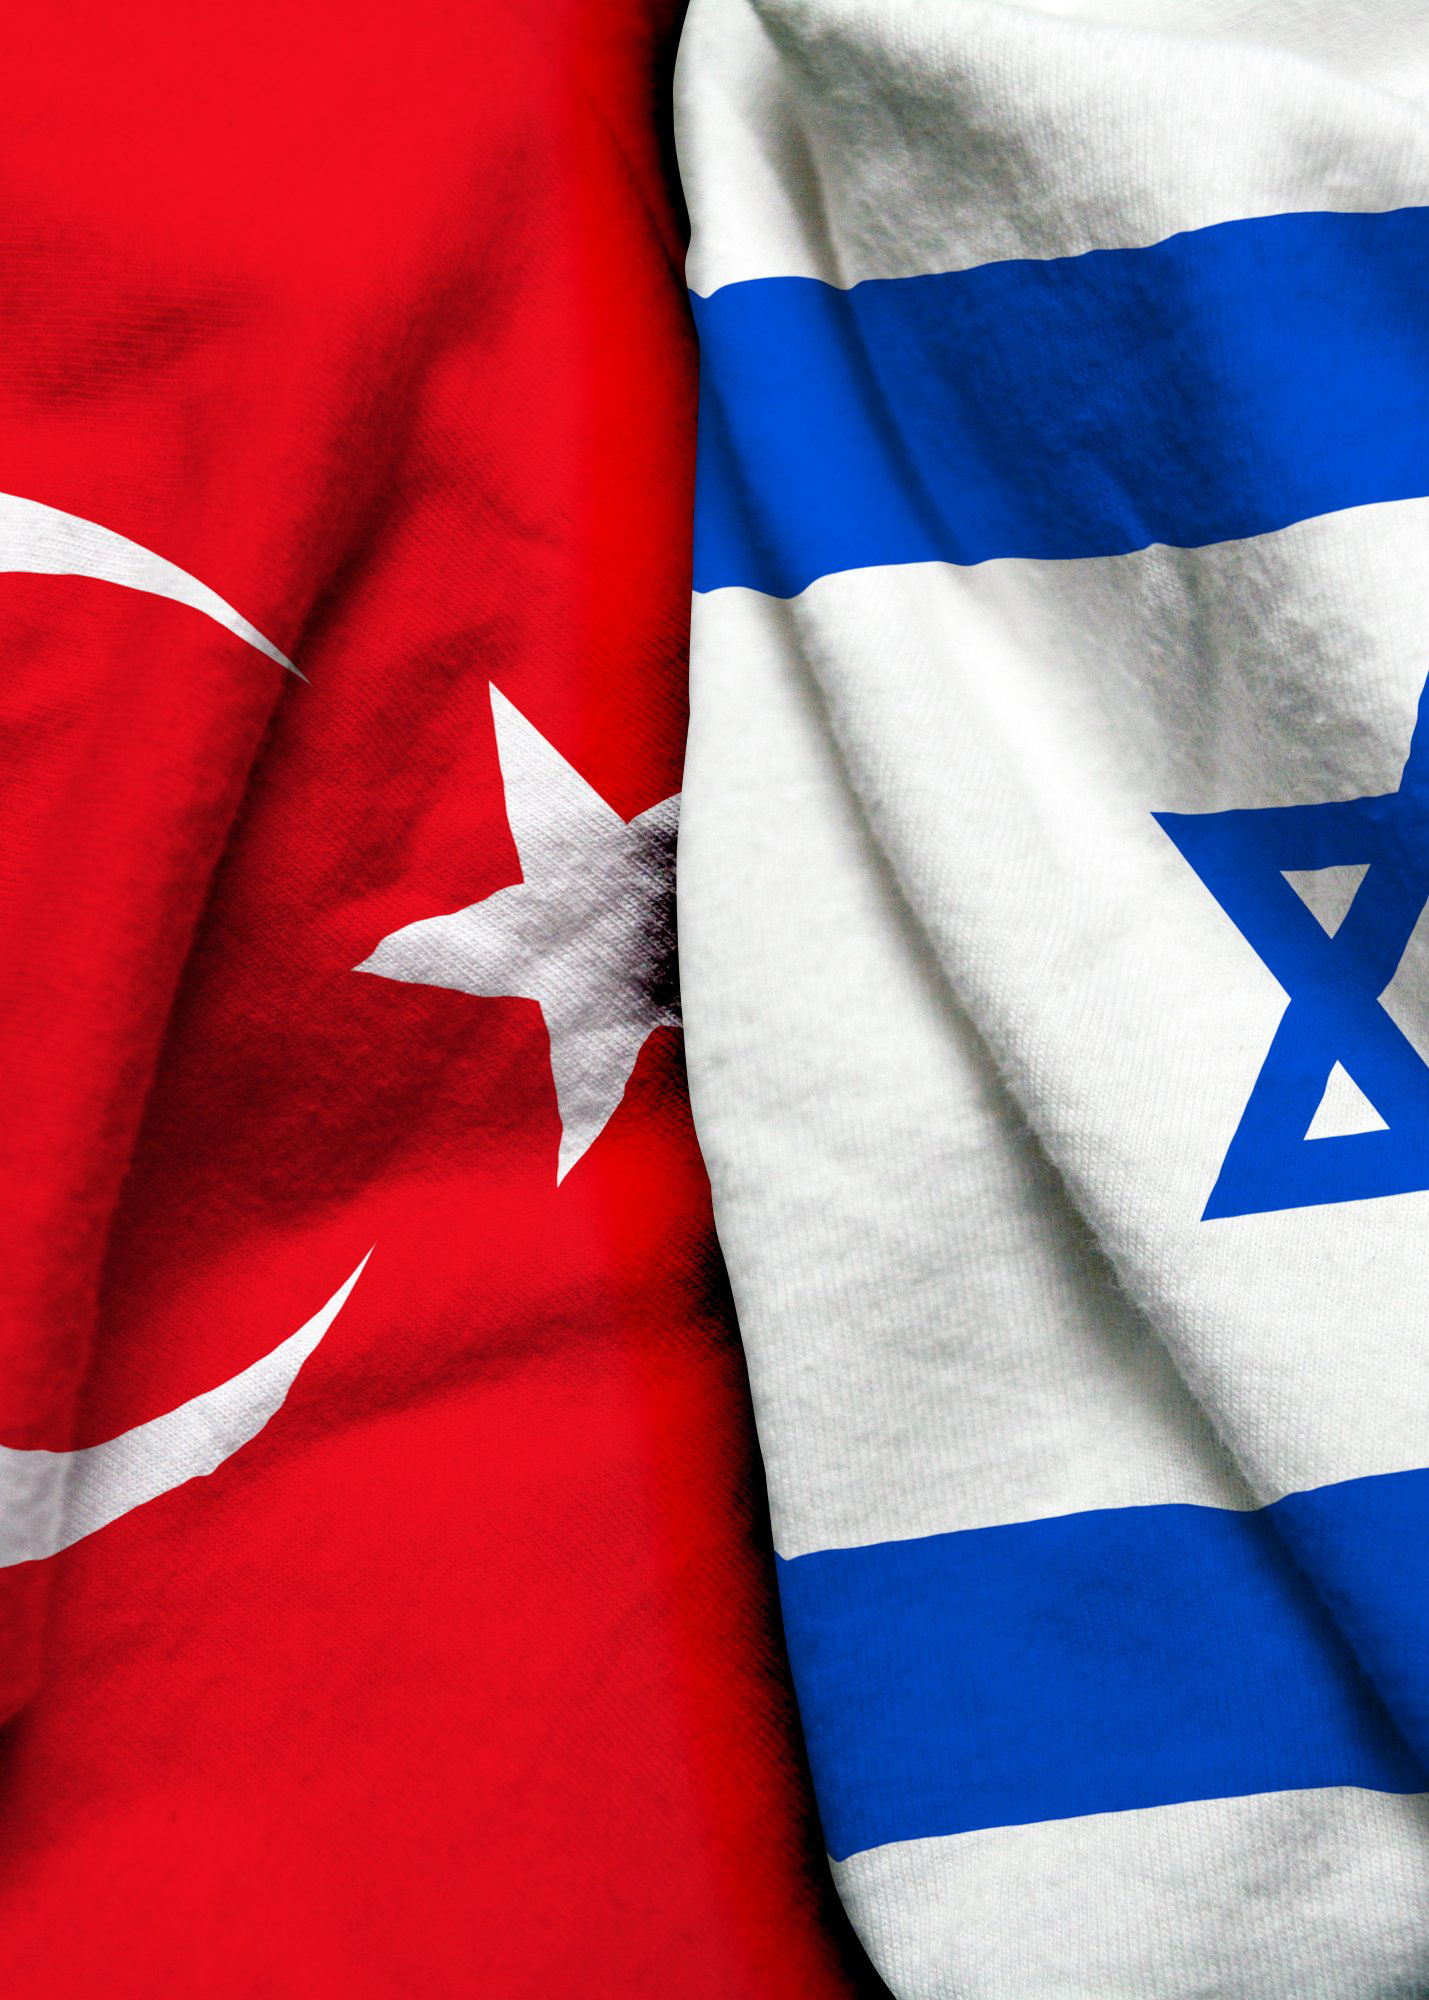 images of the israeli and turkish flags next to eachother